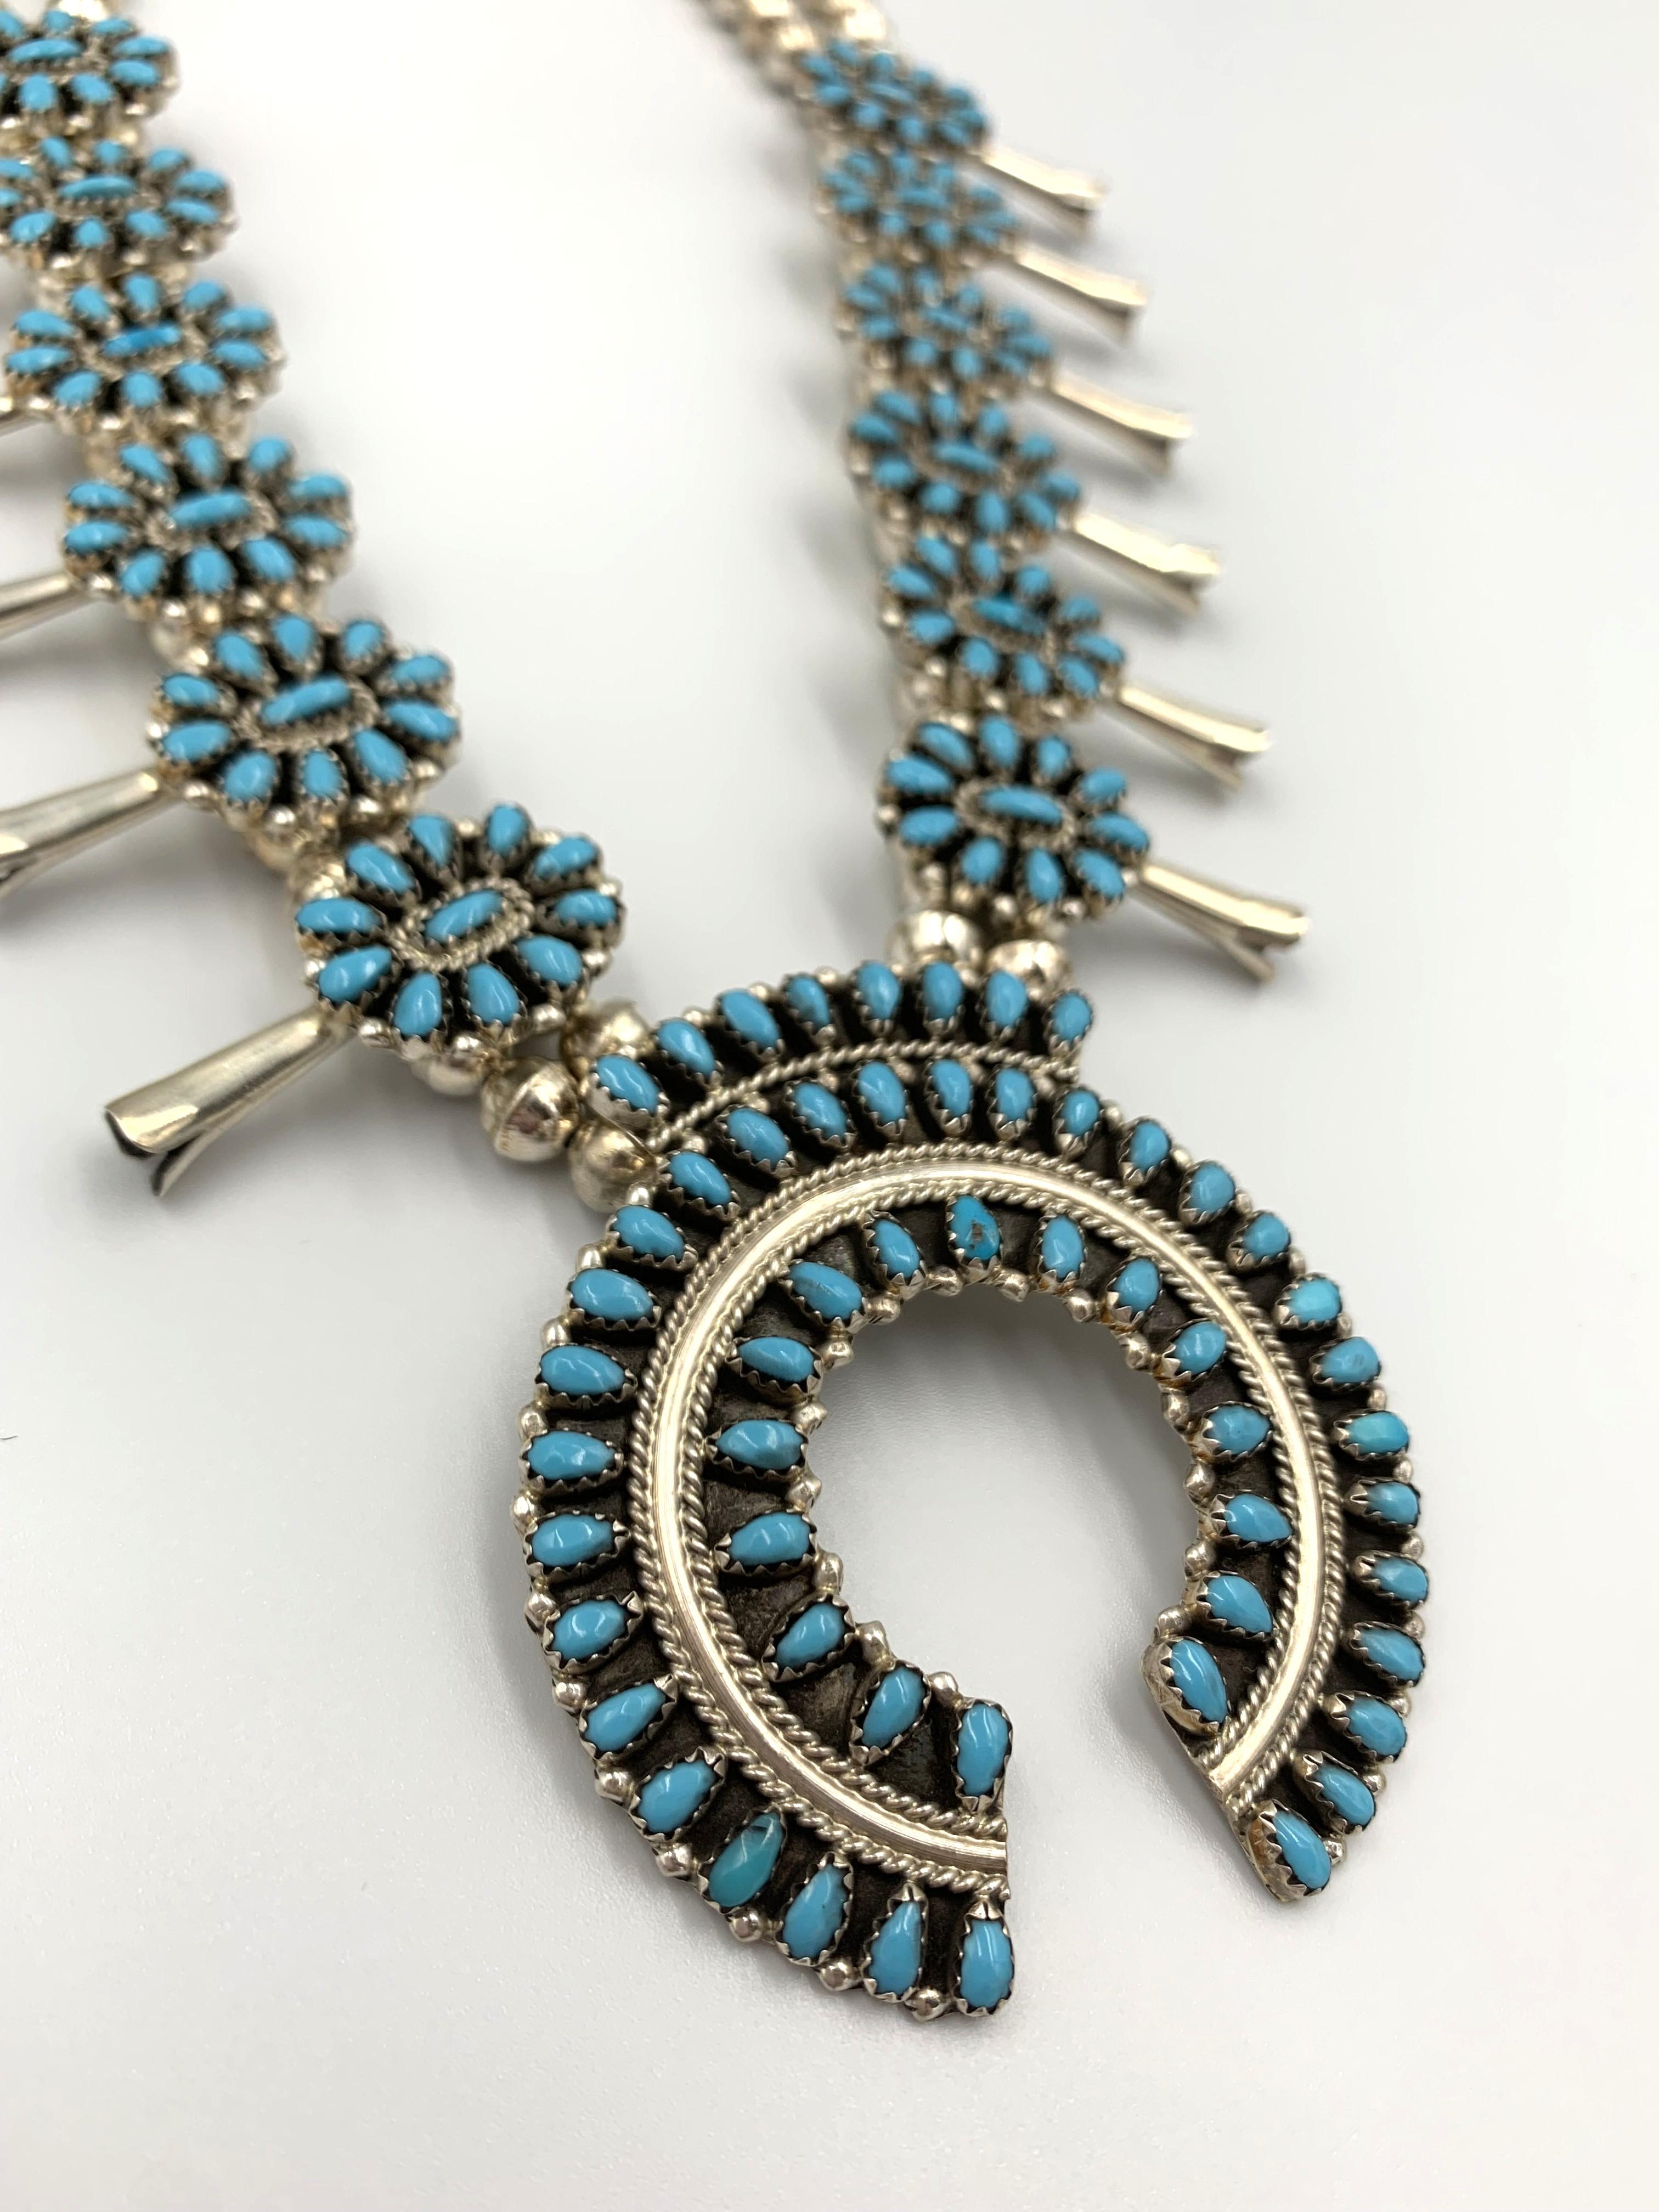 Turquoise Squash Blossom Kingman Stone Necklace Earring set by Jeffrey James  In New Condition For Sale In Scottsdale, AZ